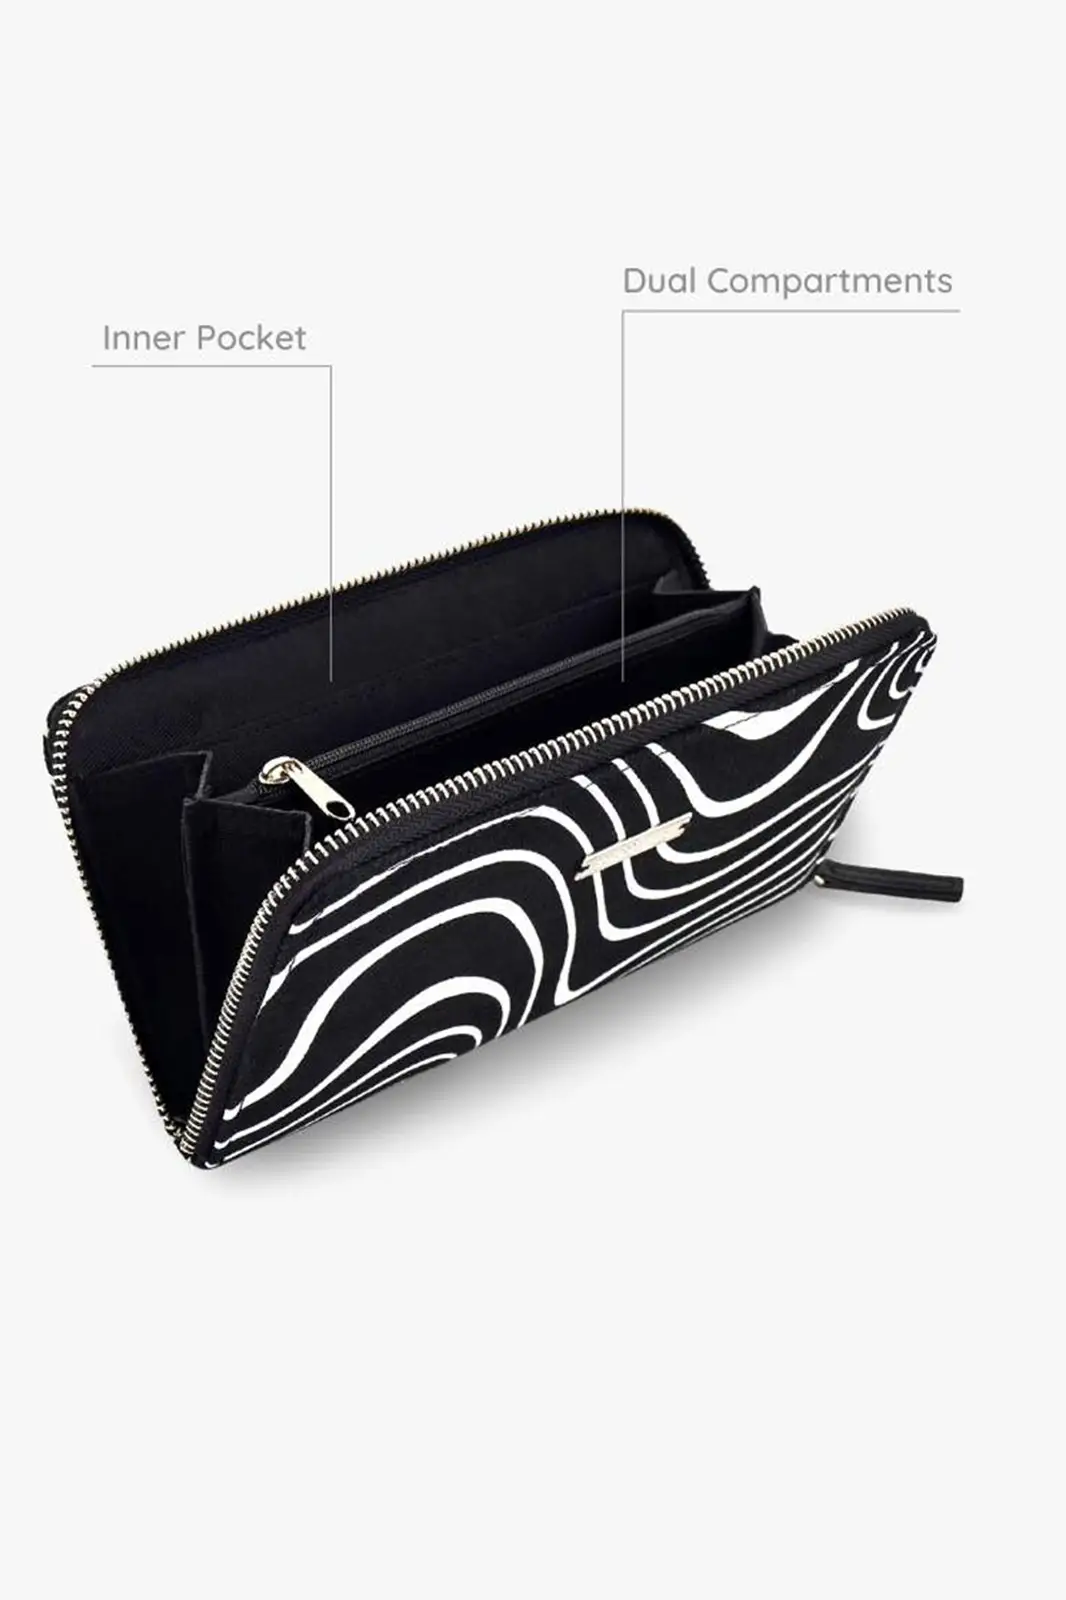 the wallet contours, wallet for woman, wallet ladies, small women wallet, small wallet ladies, purse wallet, mini purse wallet, non leather wallets, high design wallet, non leather wallets for women, branded wallets for women, luxury wallets, trendy wallets for ladies, ecoright